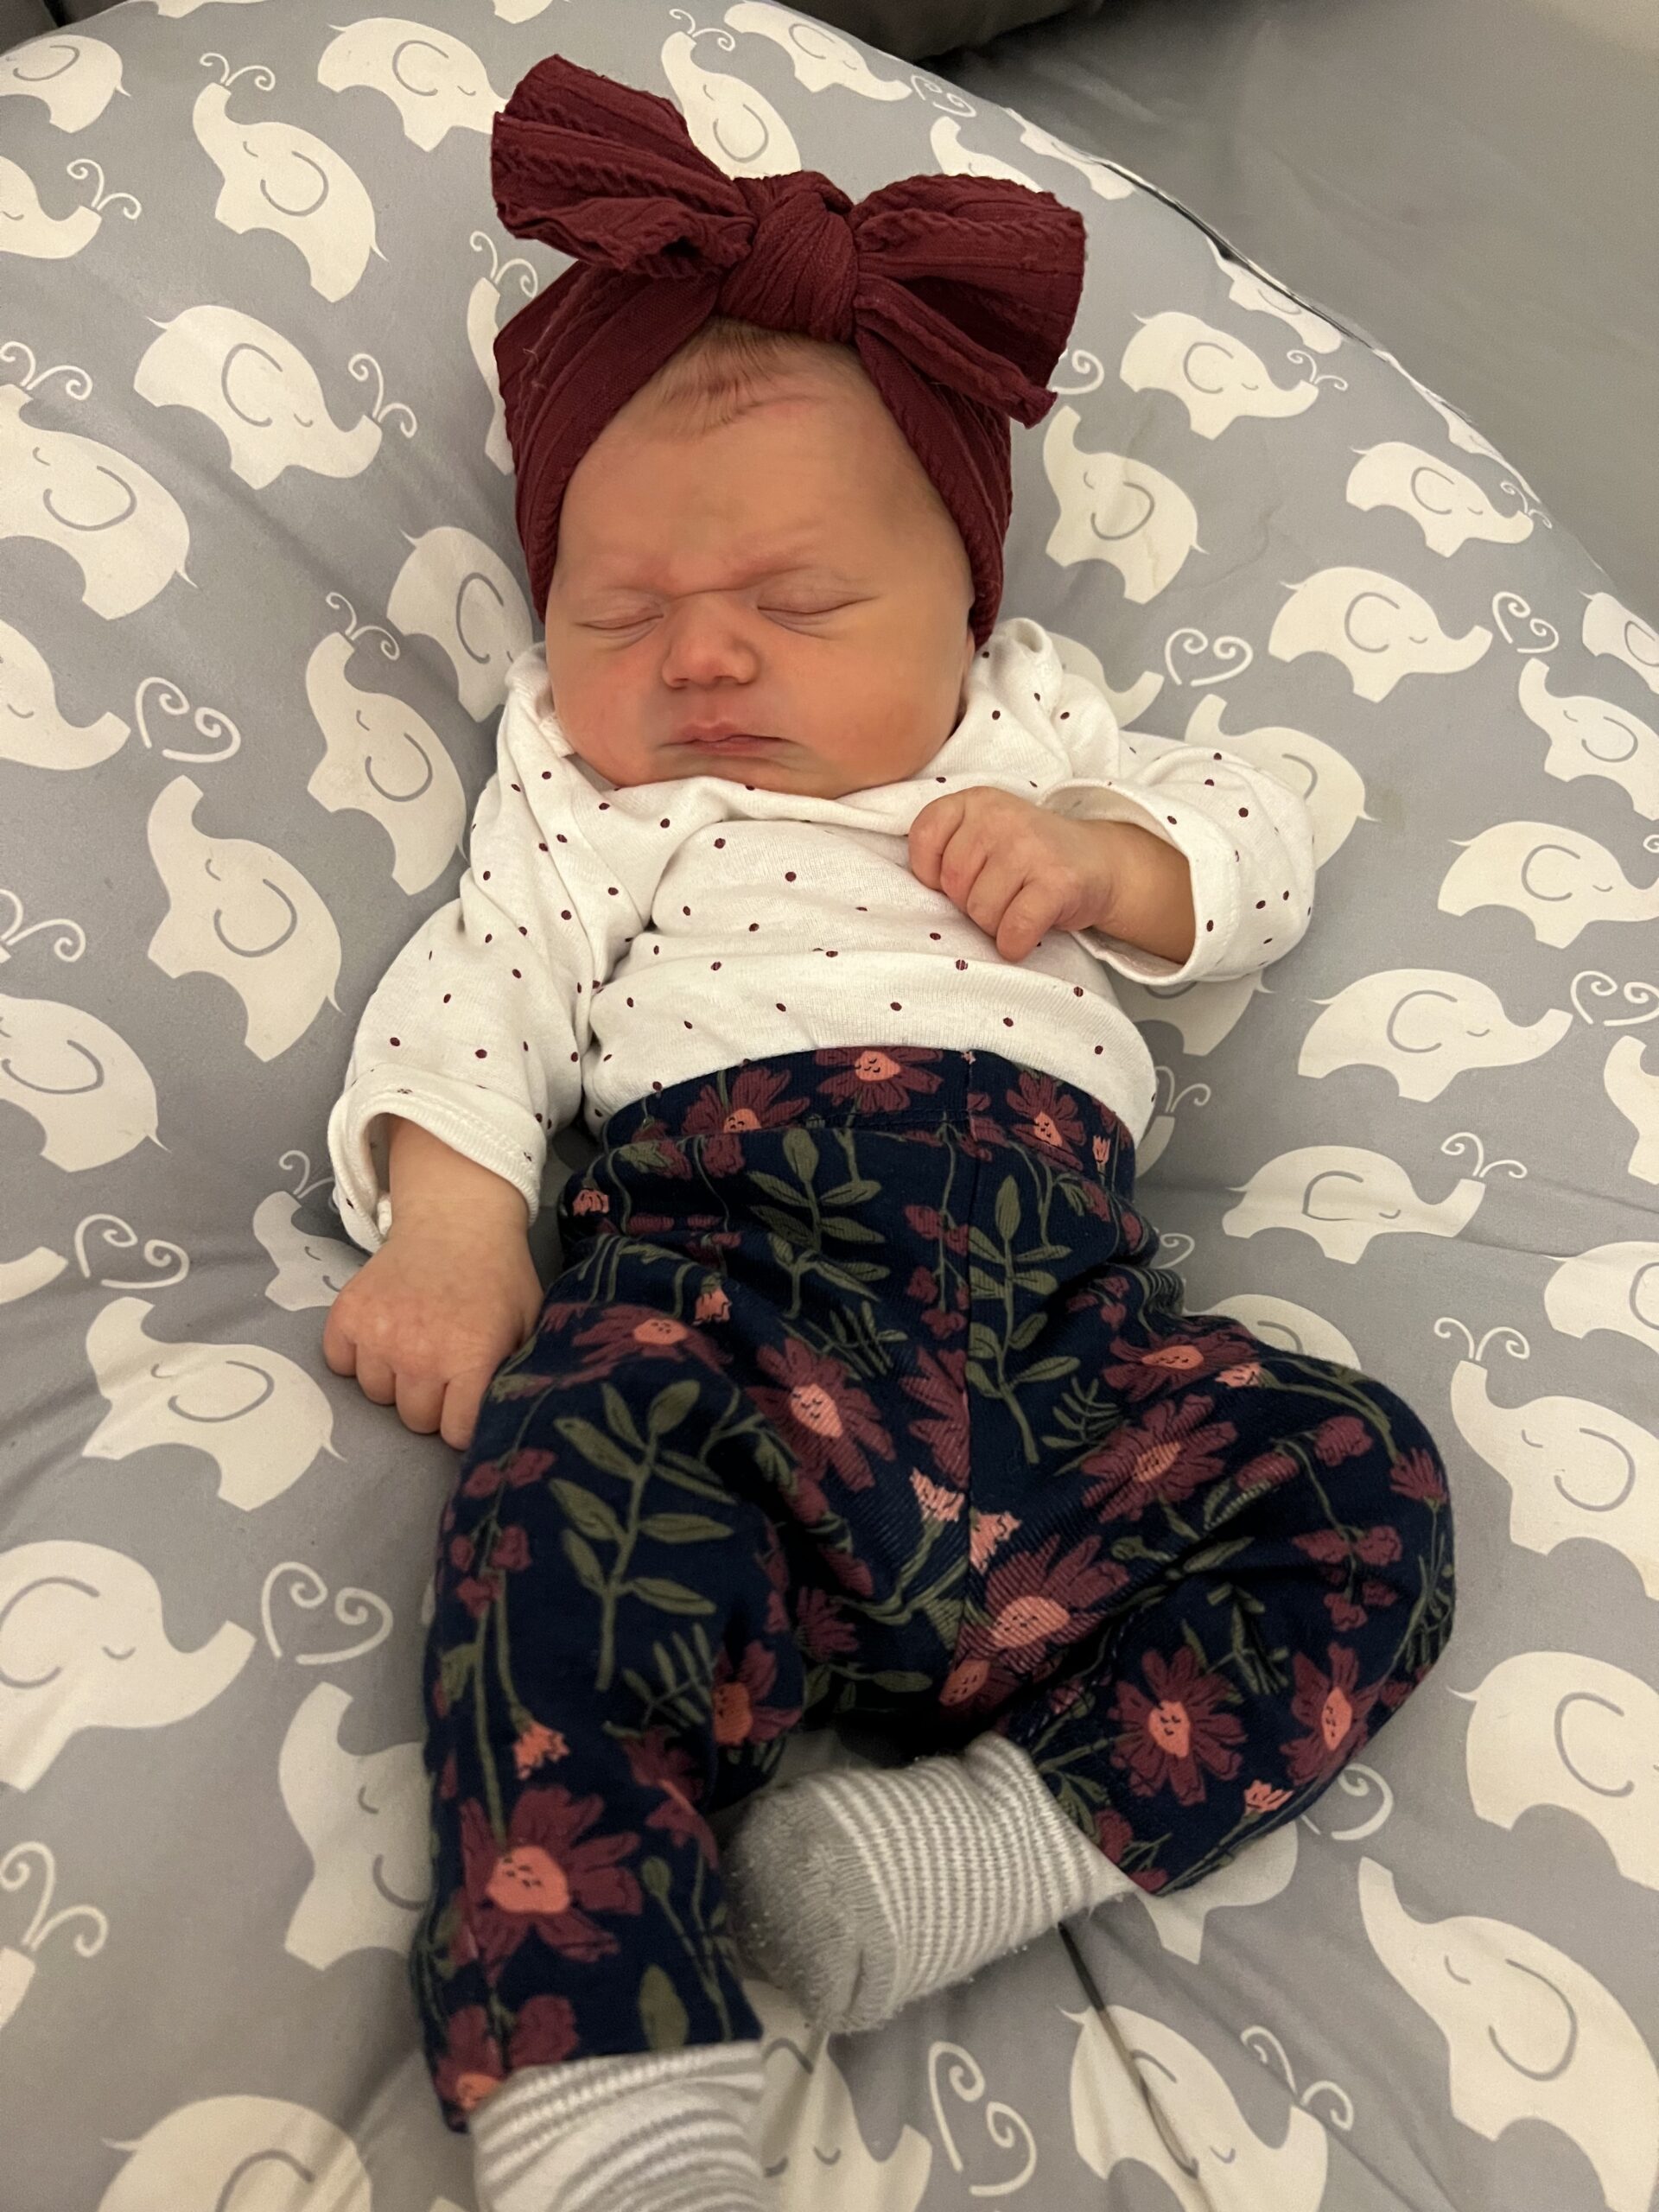 Solange birth story, she is at her home in Minneapolis, days after birth, laying on her comfy cushion taking a snooze 